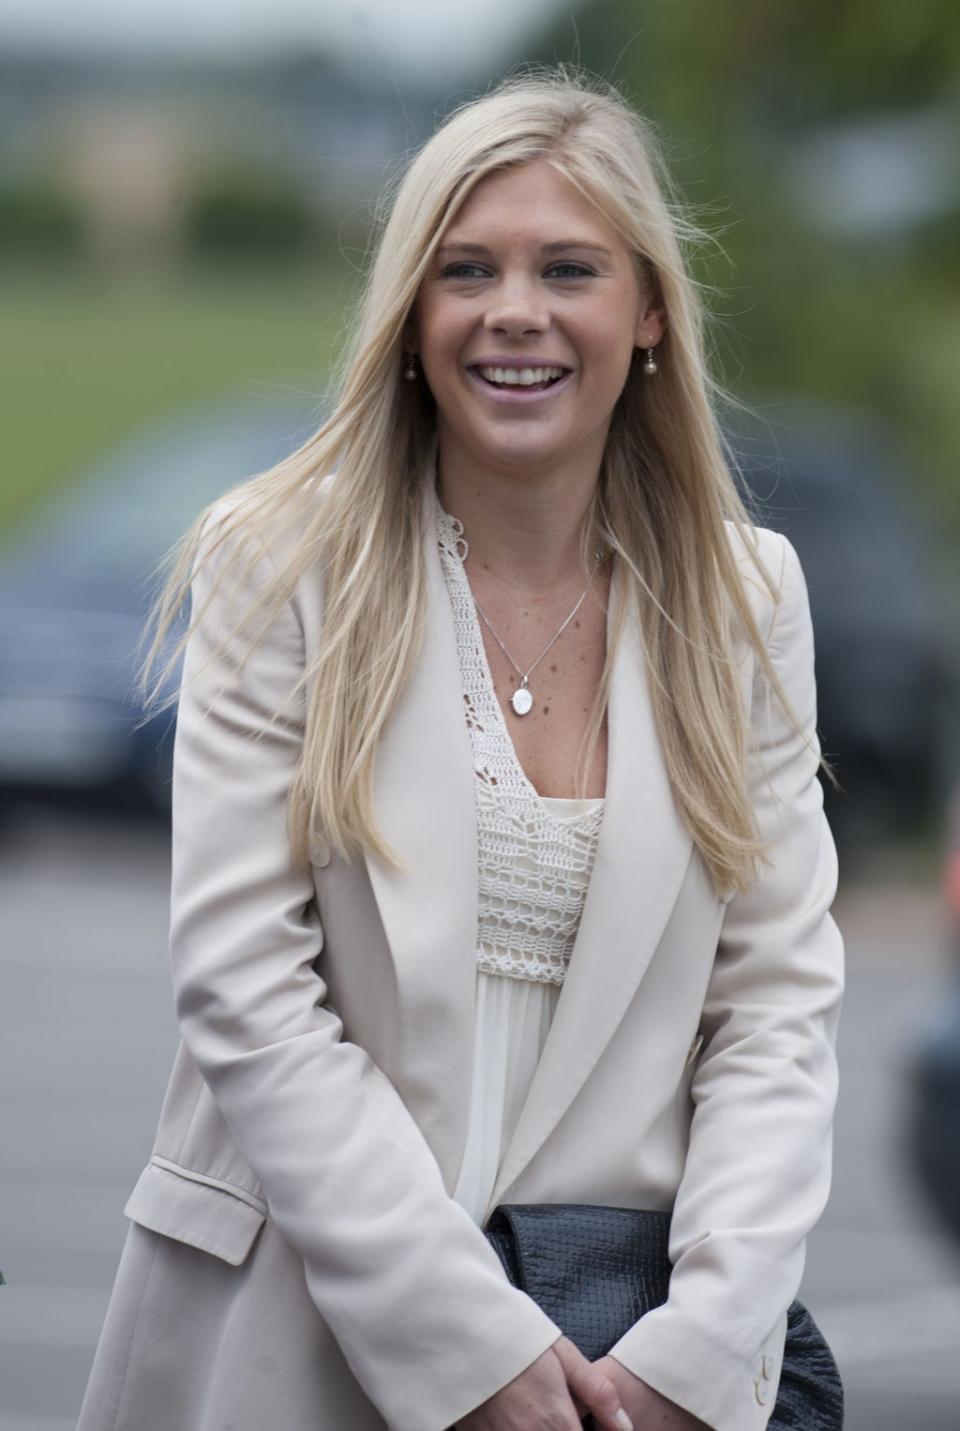 Gavin Burrows claims that Chelsy Davy’s phone was monitored (Jamie Wiseman/PA) (PA Archive)